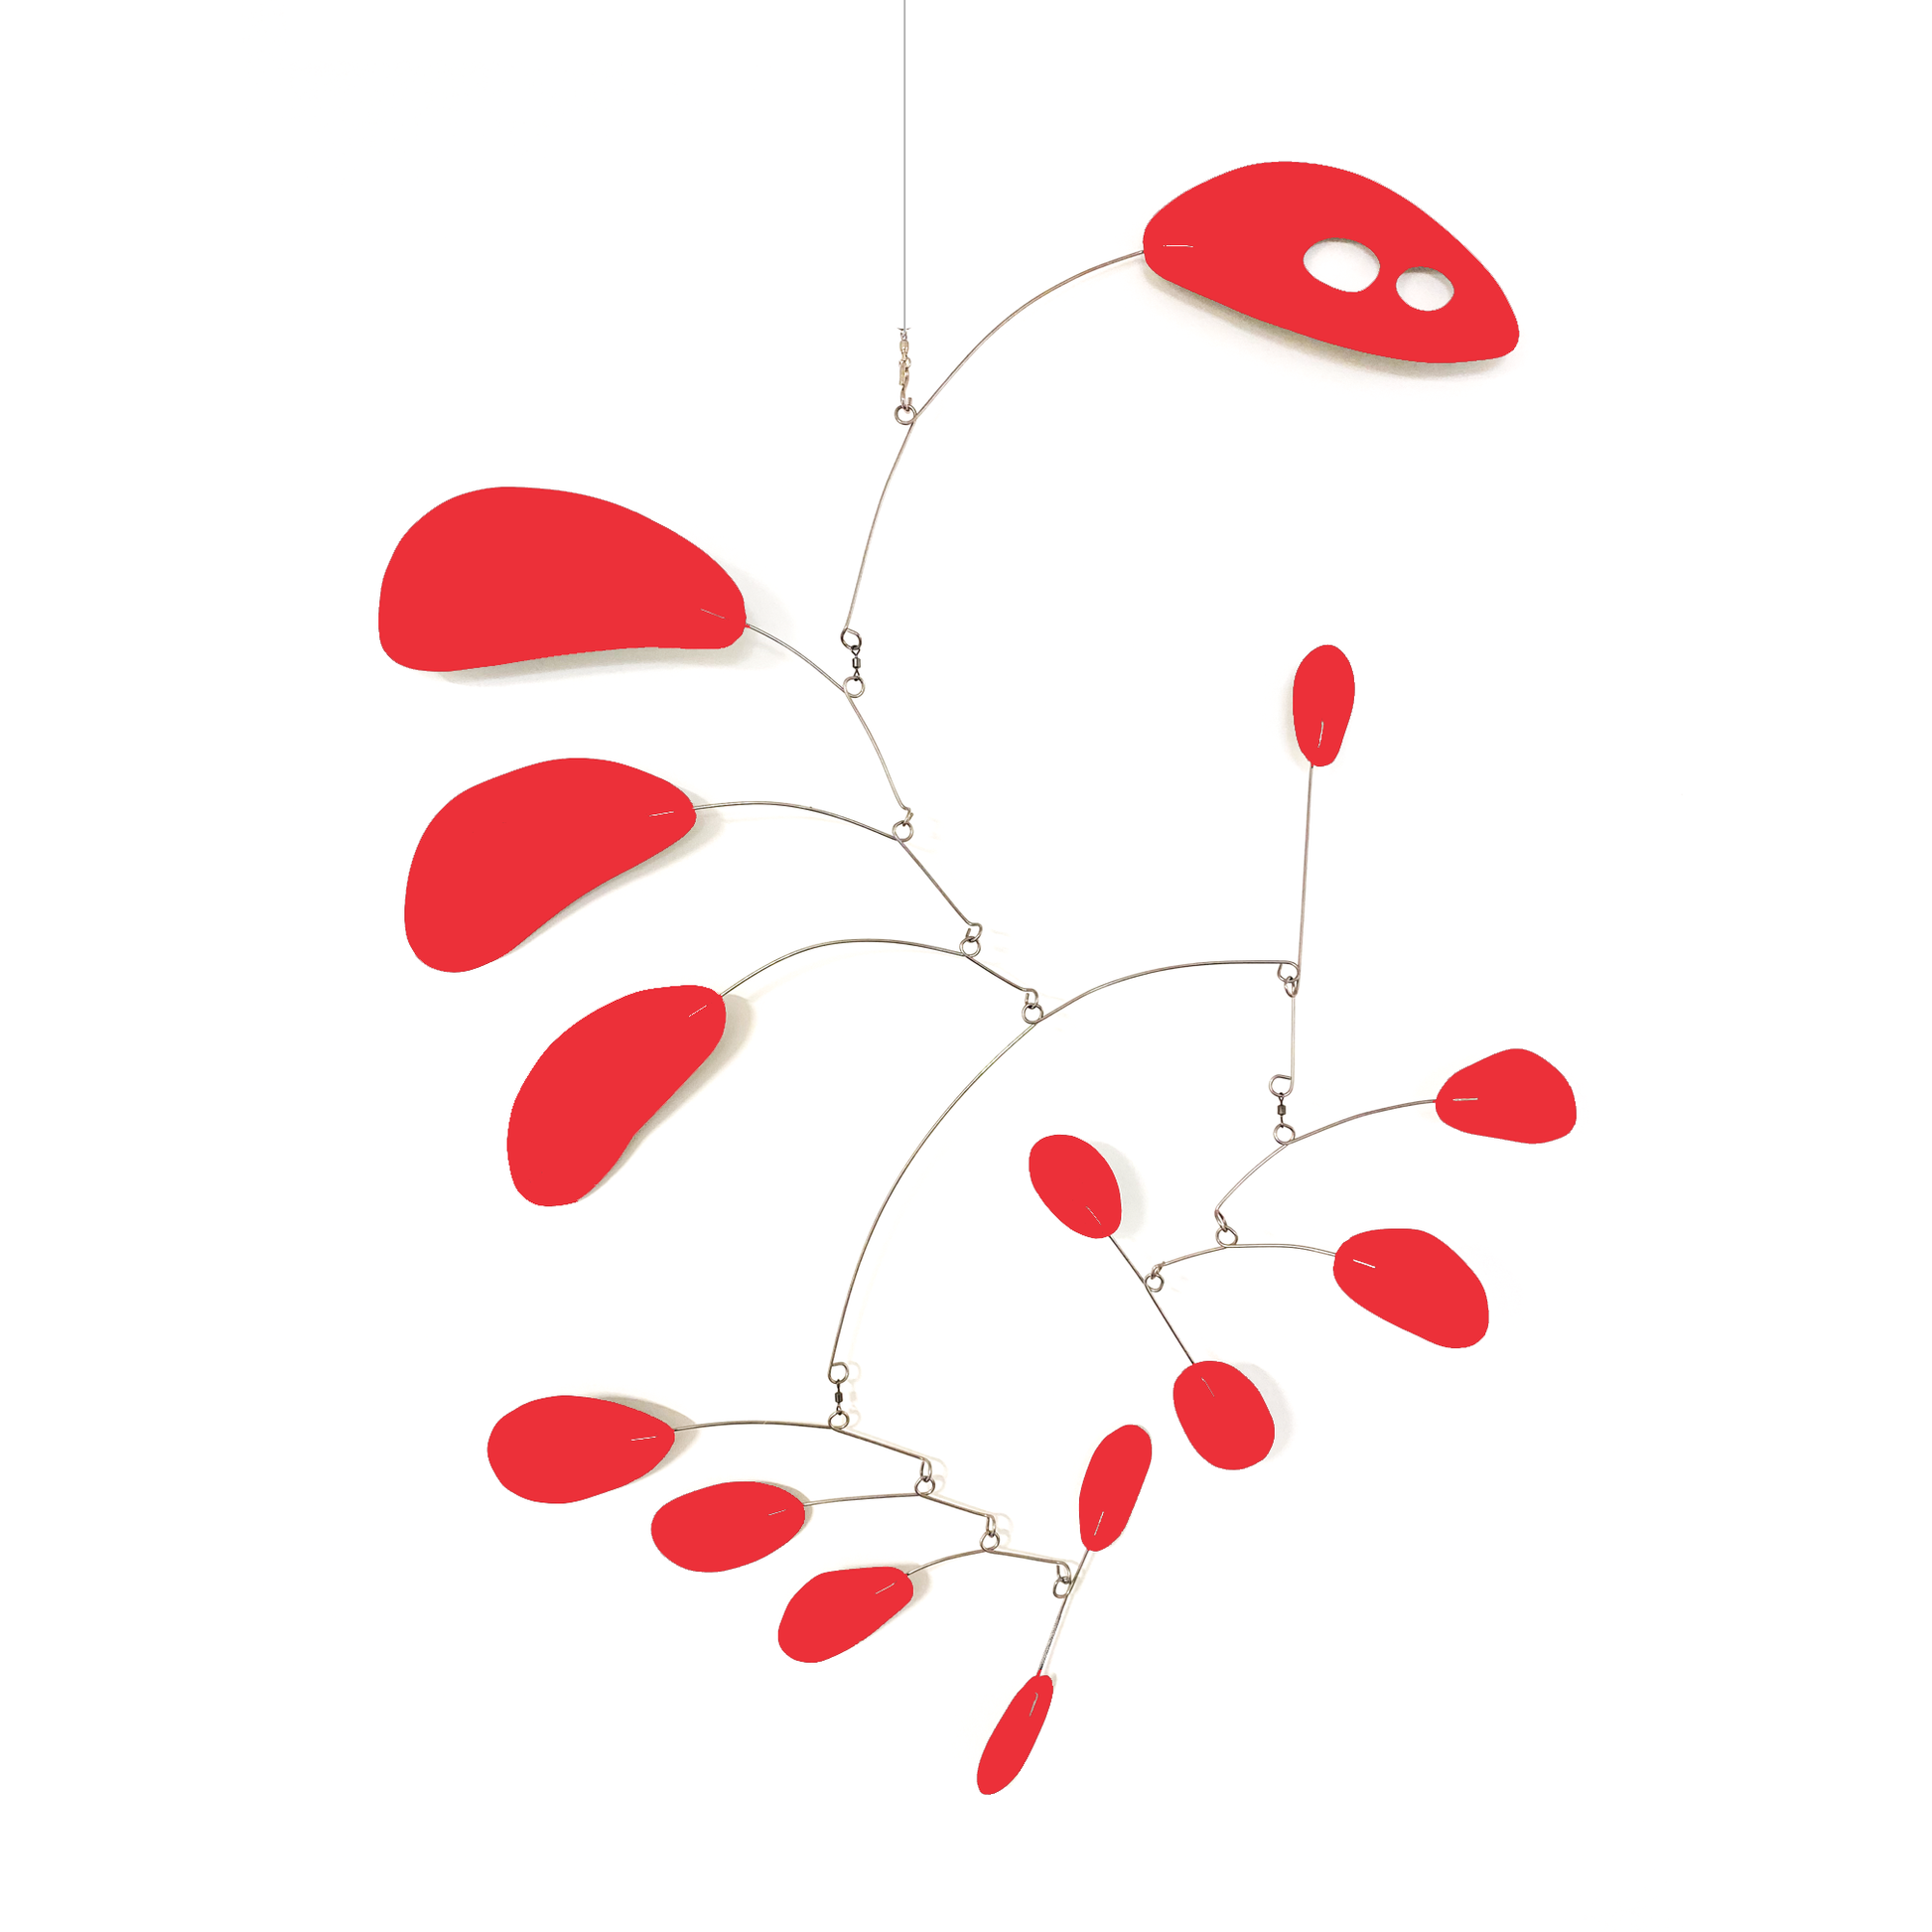 CoolCat mid century modern inspired hanging kinetic art mobile in all red by AtomicMobiles.com